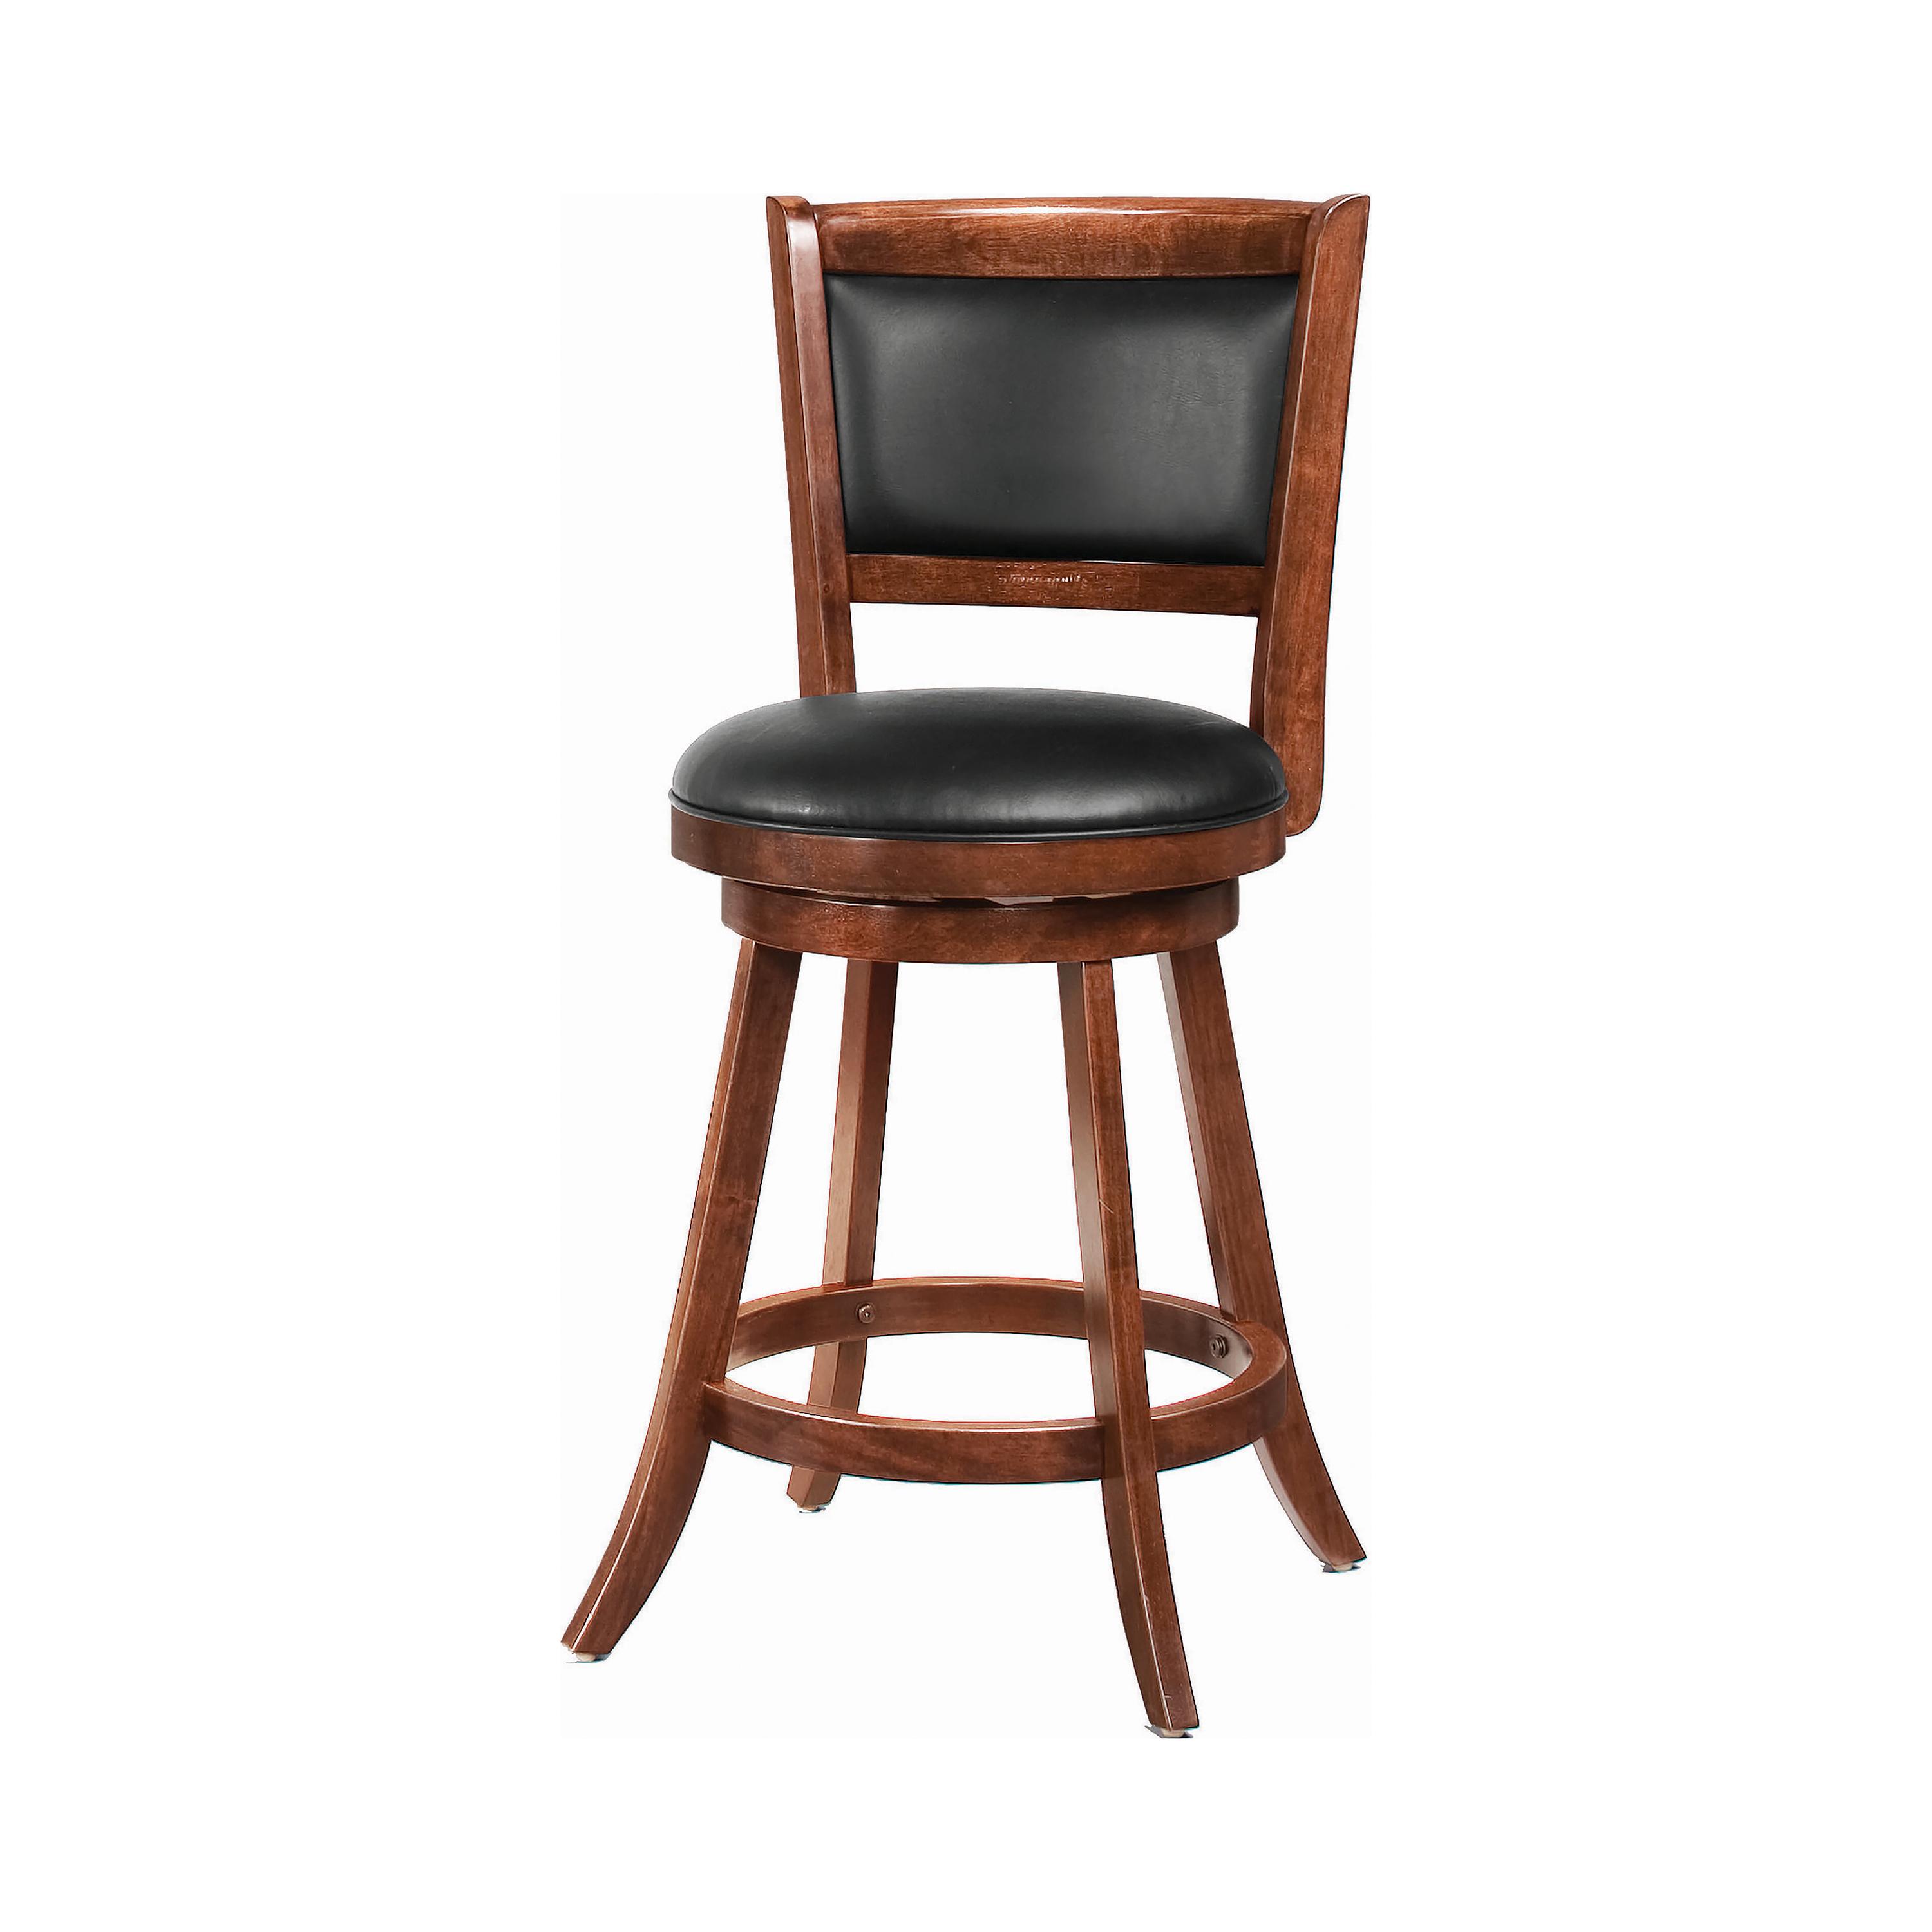 Transitional Counter Height Stool Set 101919 101919 in Chestnut, Black Leatherette